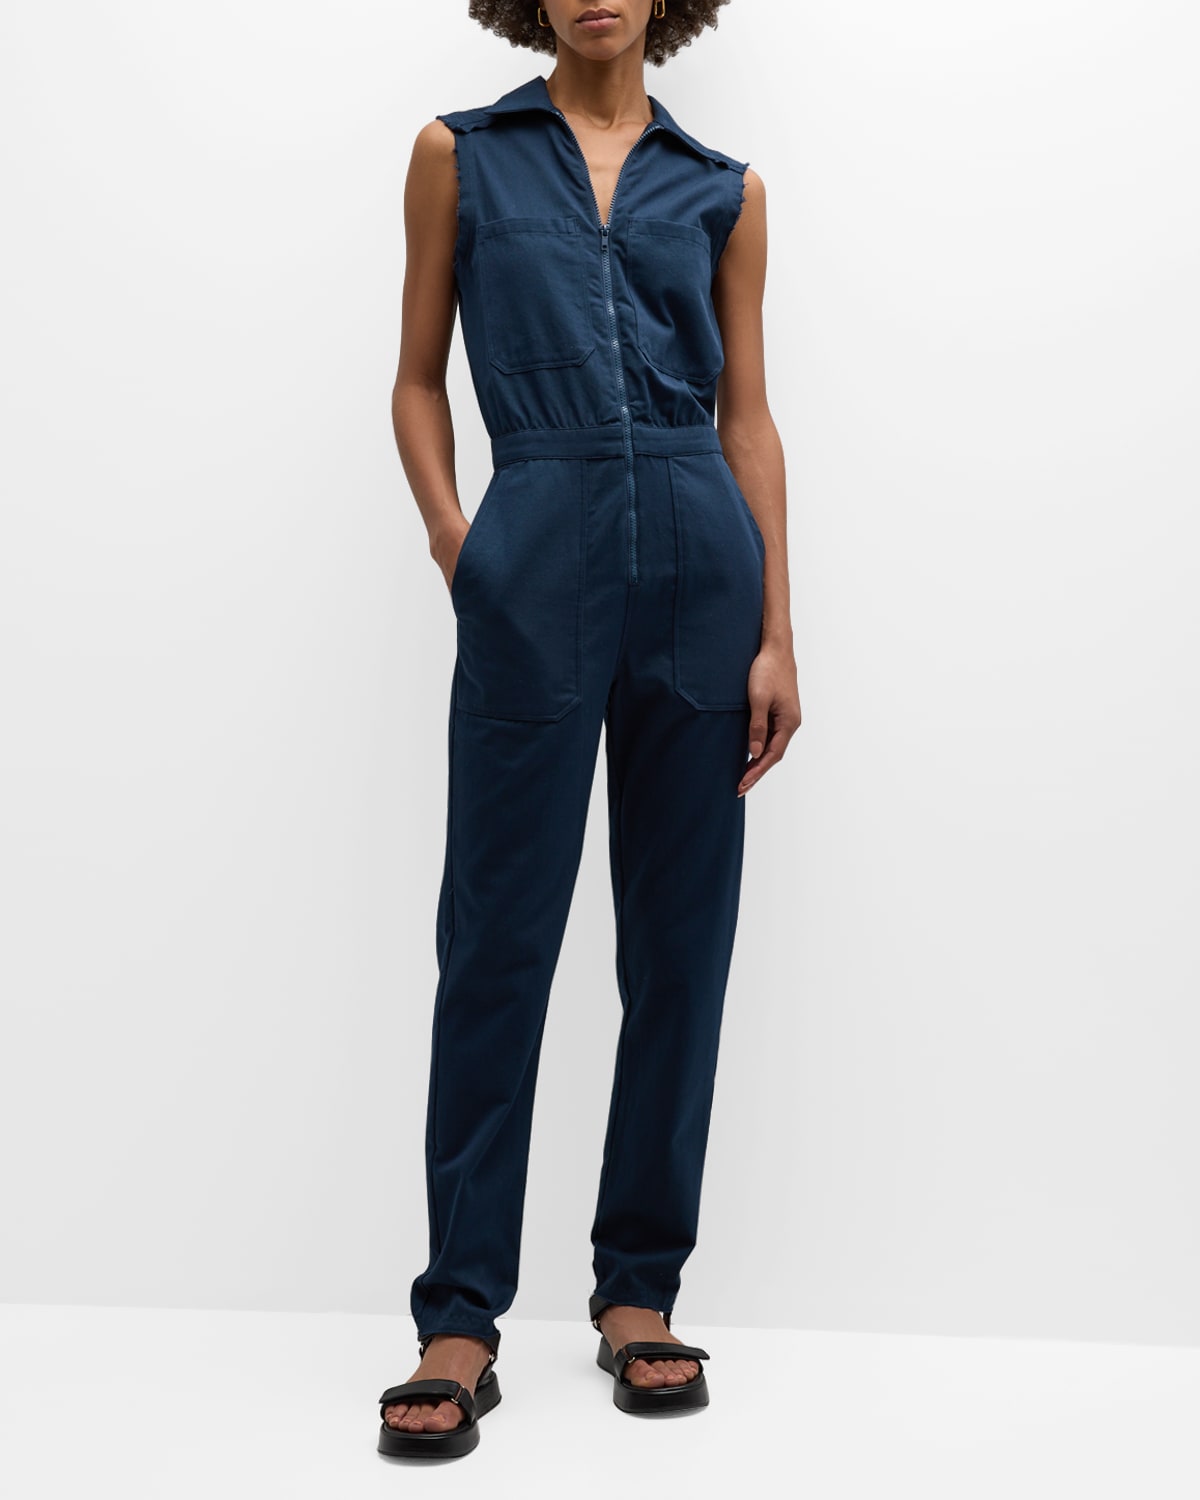 Rivet Utility Boss Patch Pocket Utility Jumpsuit In Navy Cotton Twill